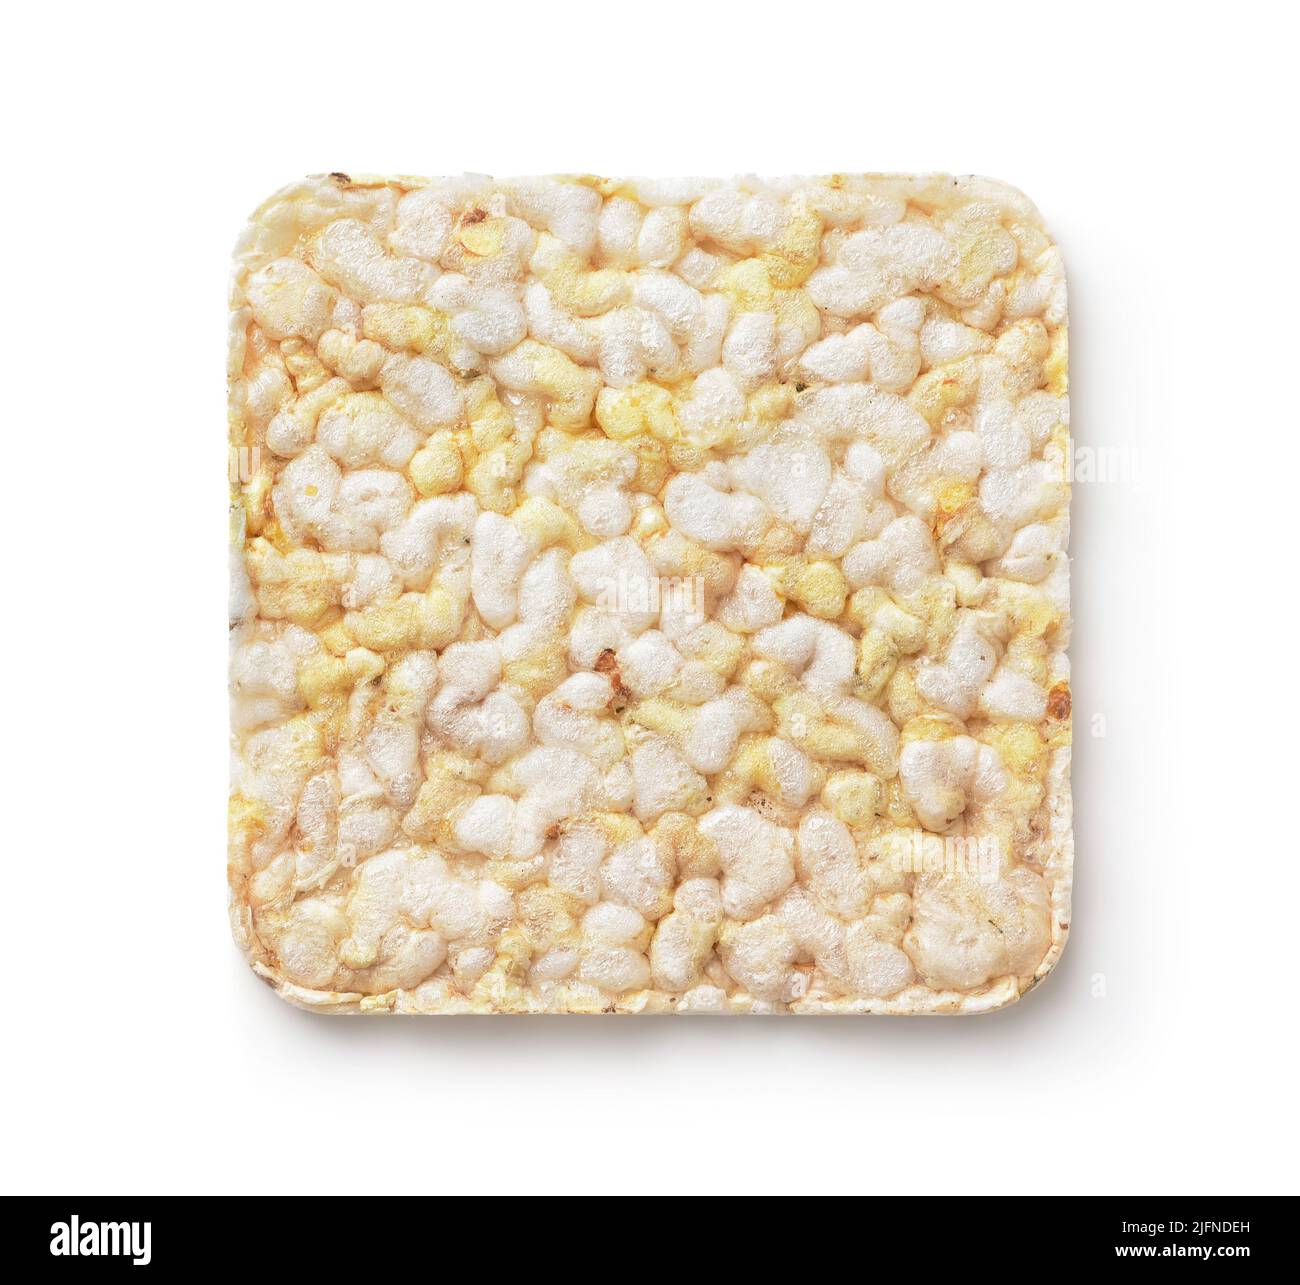 Top view of square puffed wholegrain rice crispbread isolated on white Stock Photo